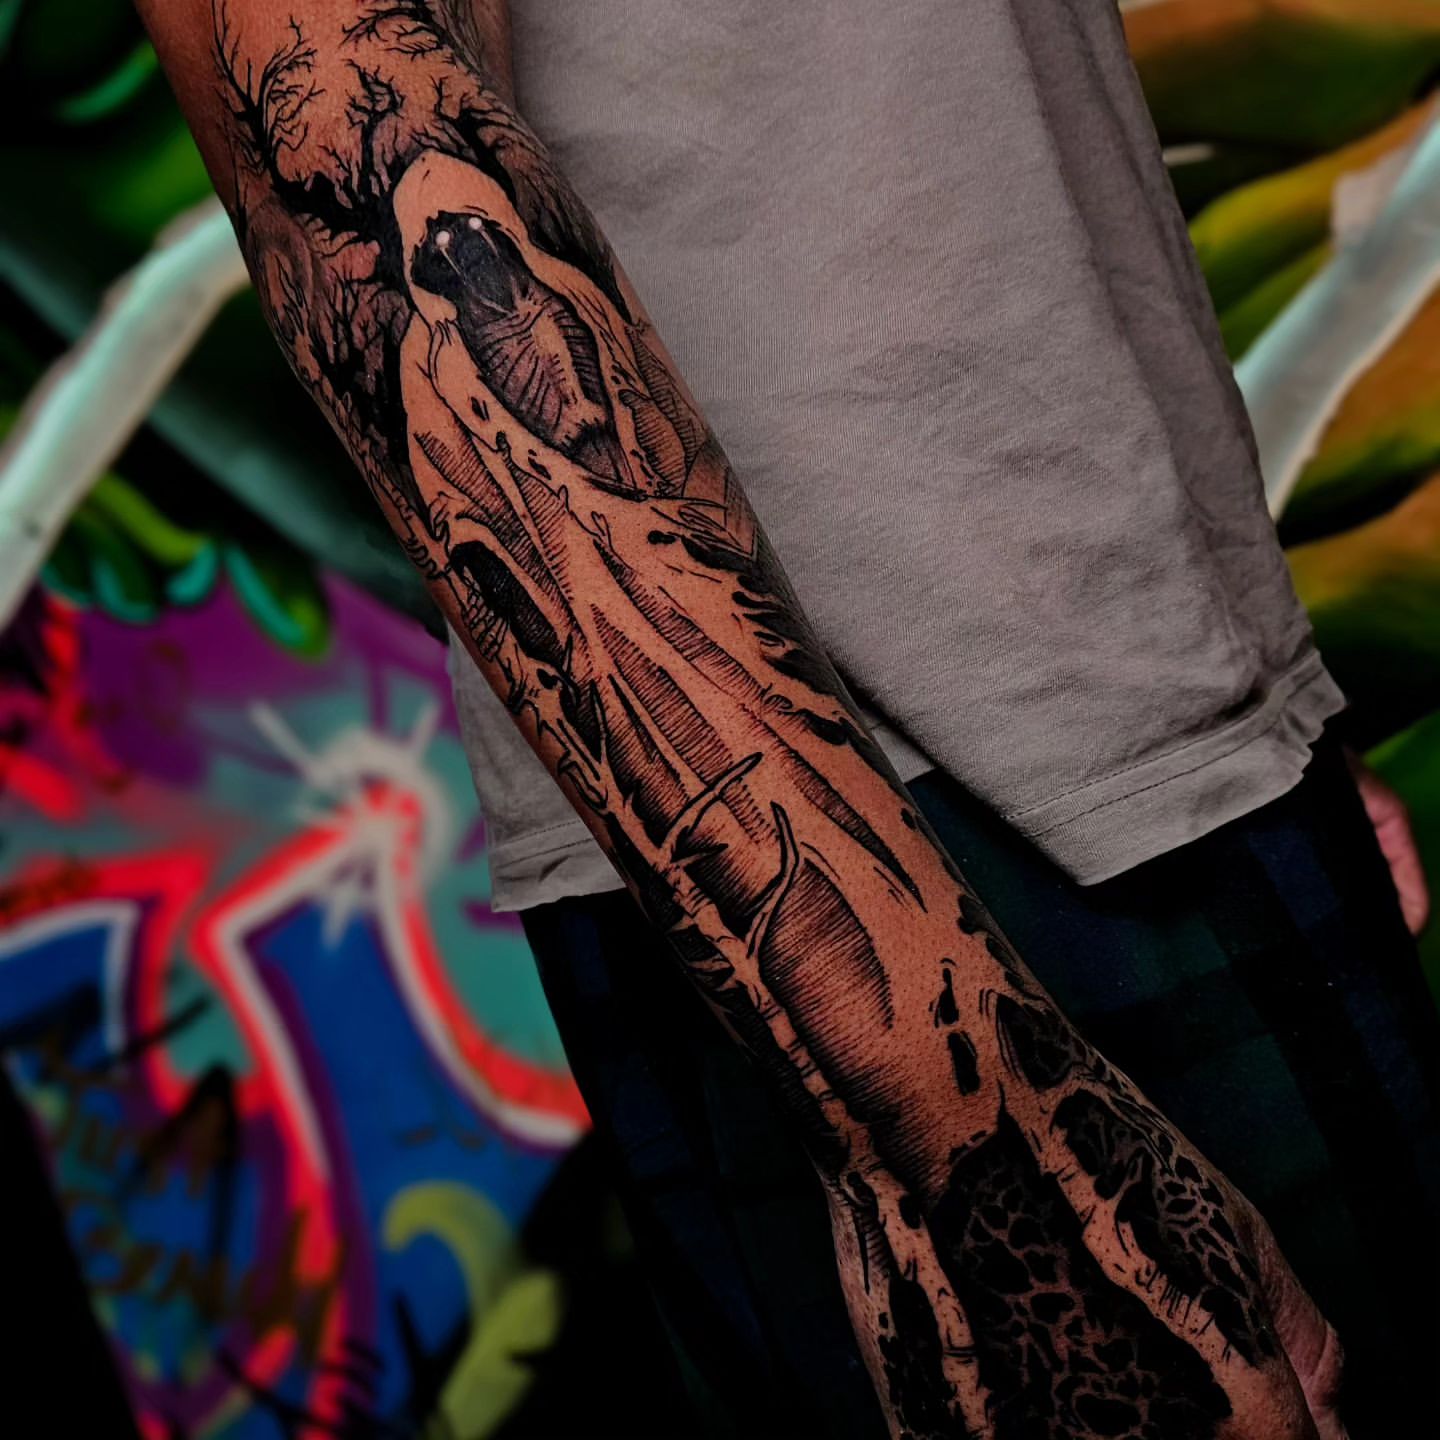 Pin by Dah. Twinx on Tatuering inspiration | Outer forearm tattoo, Cool forearm  tattoos, Lower arm tattoos